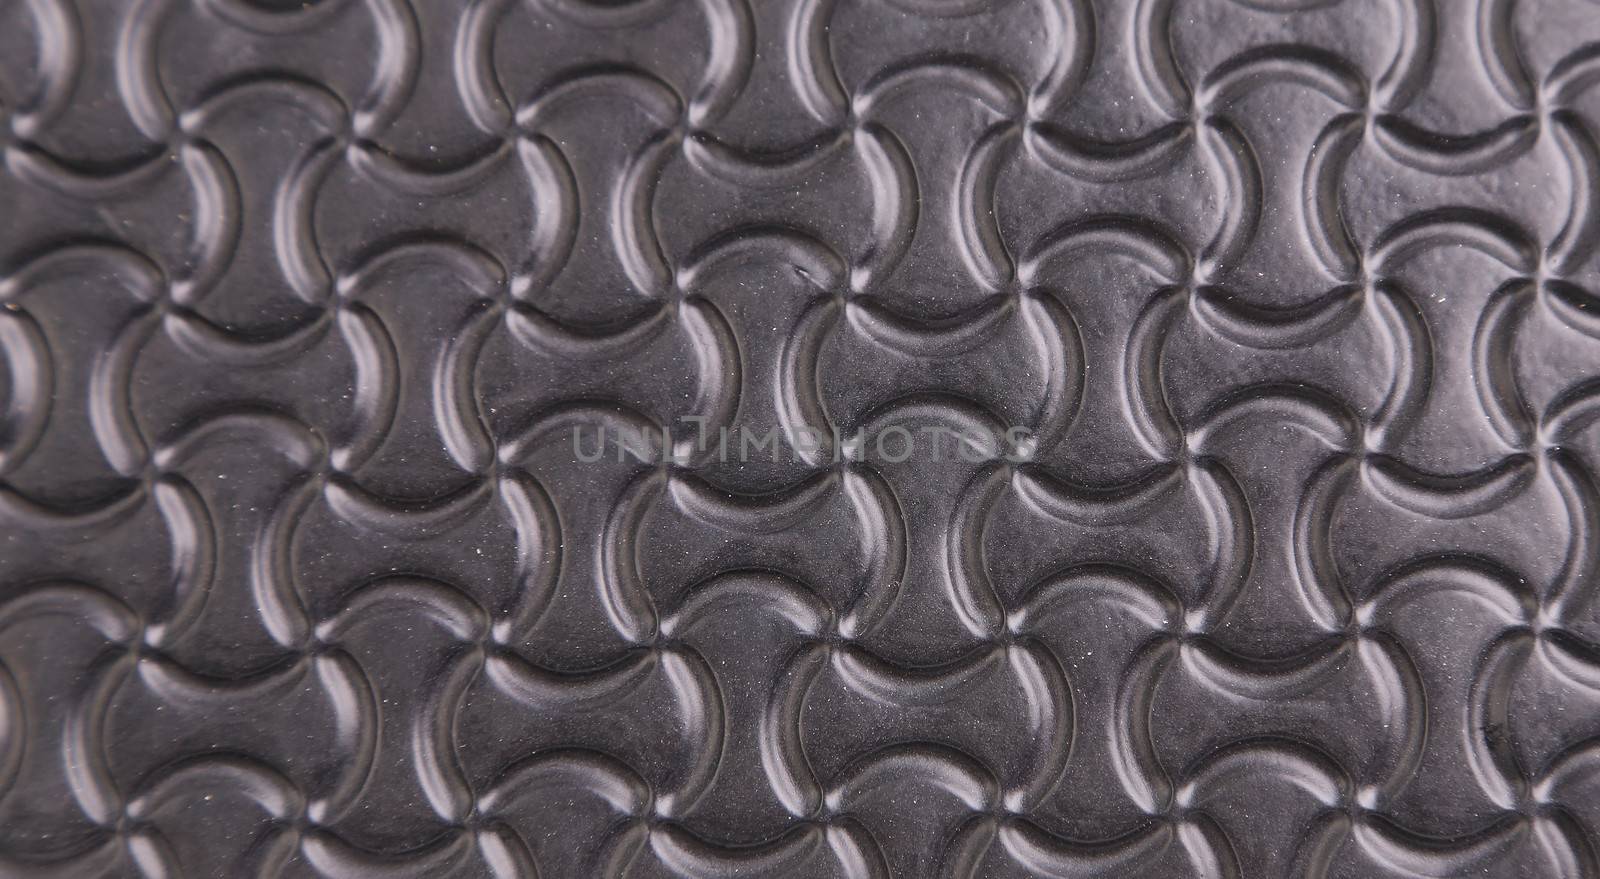 Black background with a pattern of stylized infinity